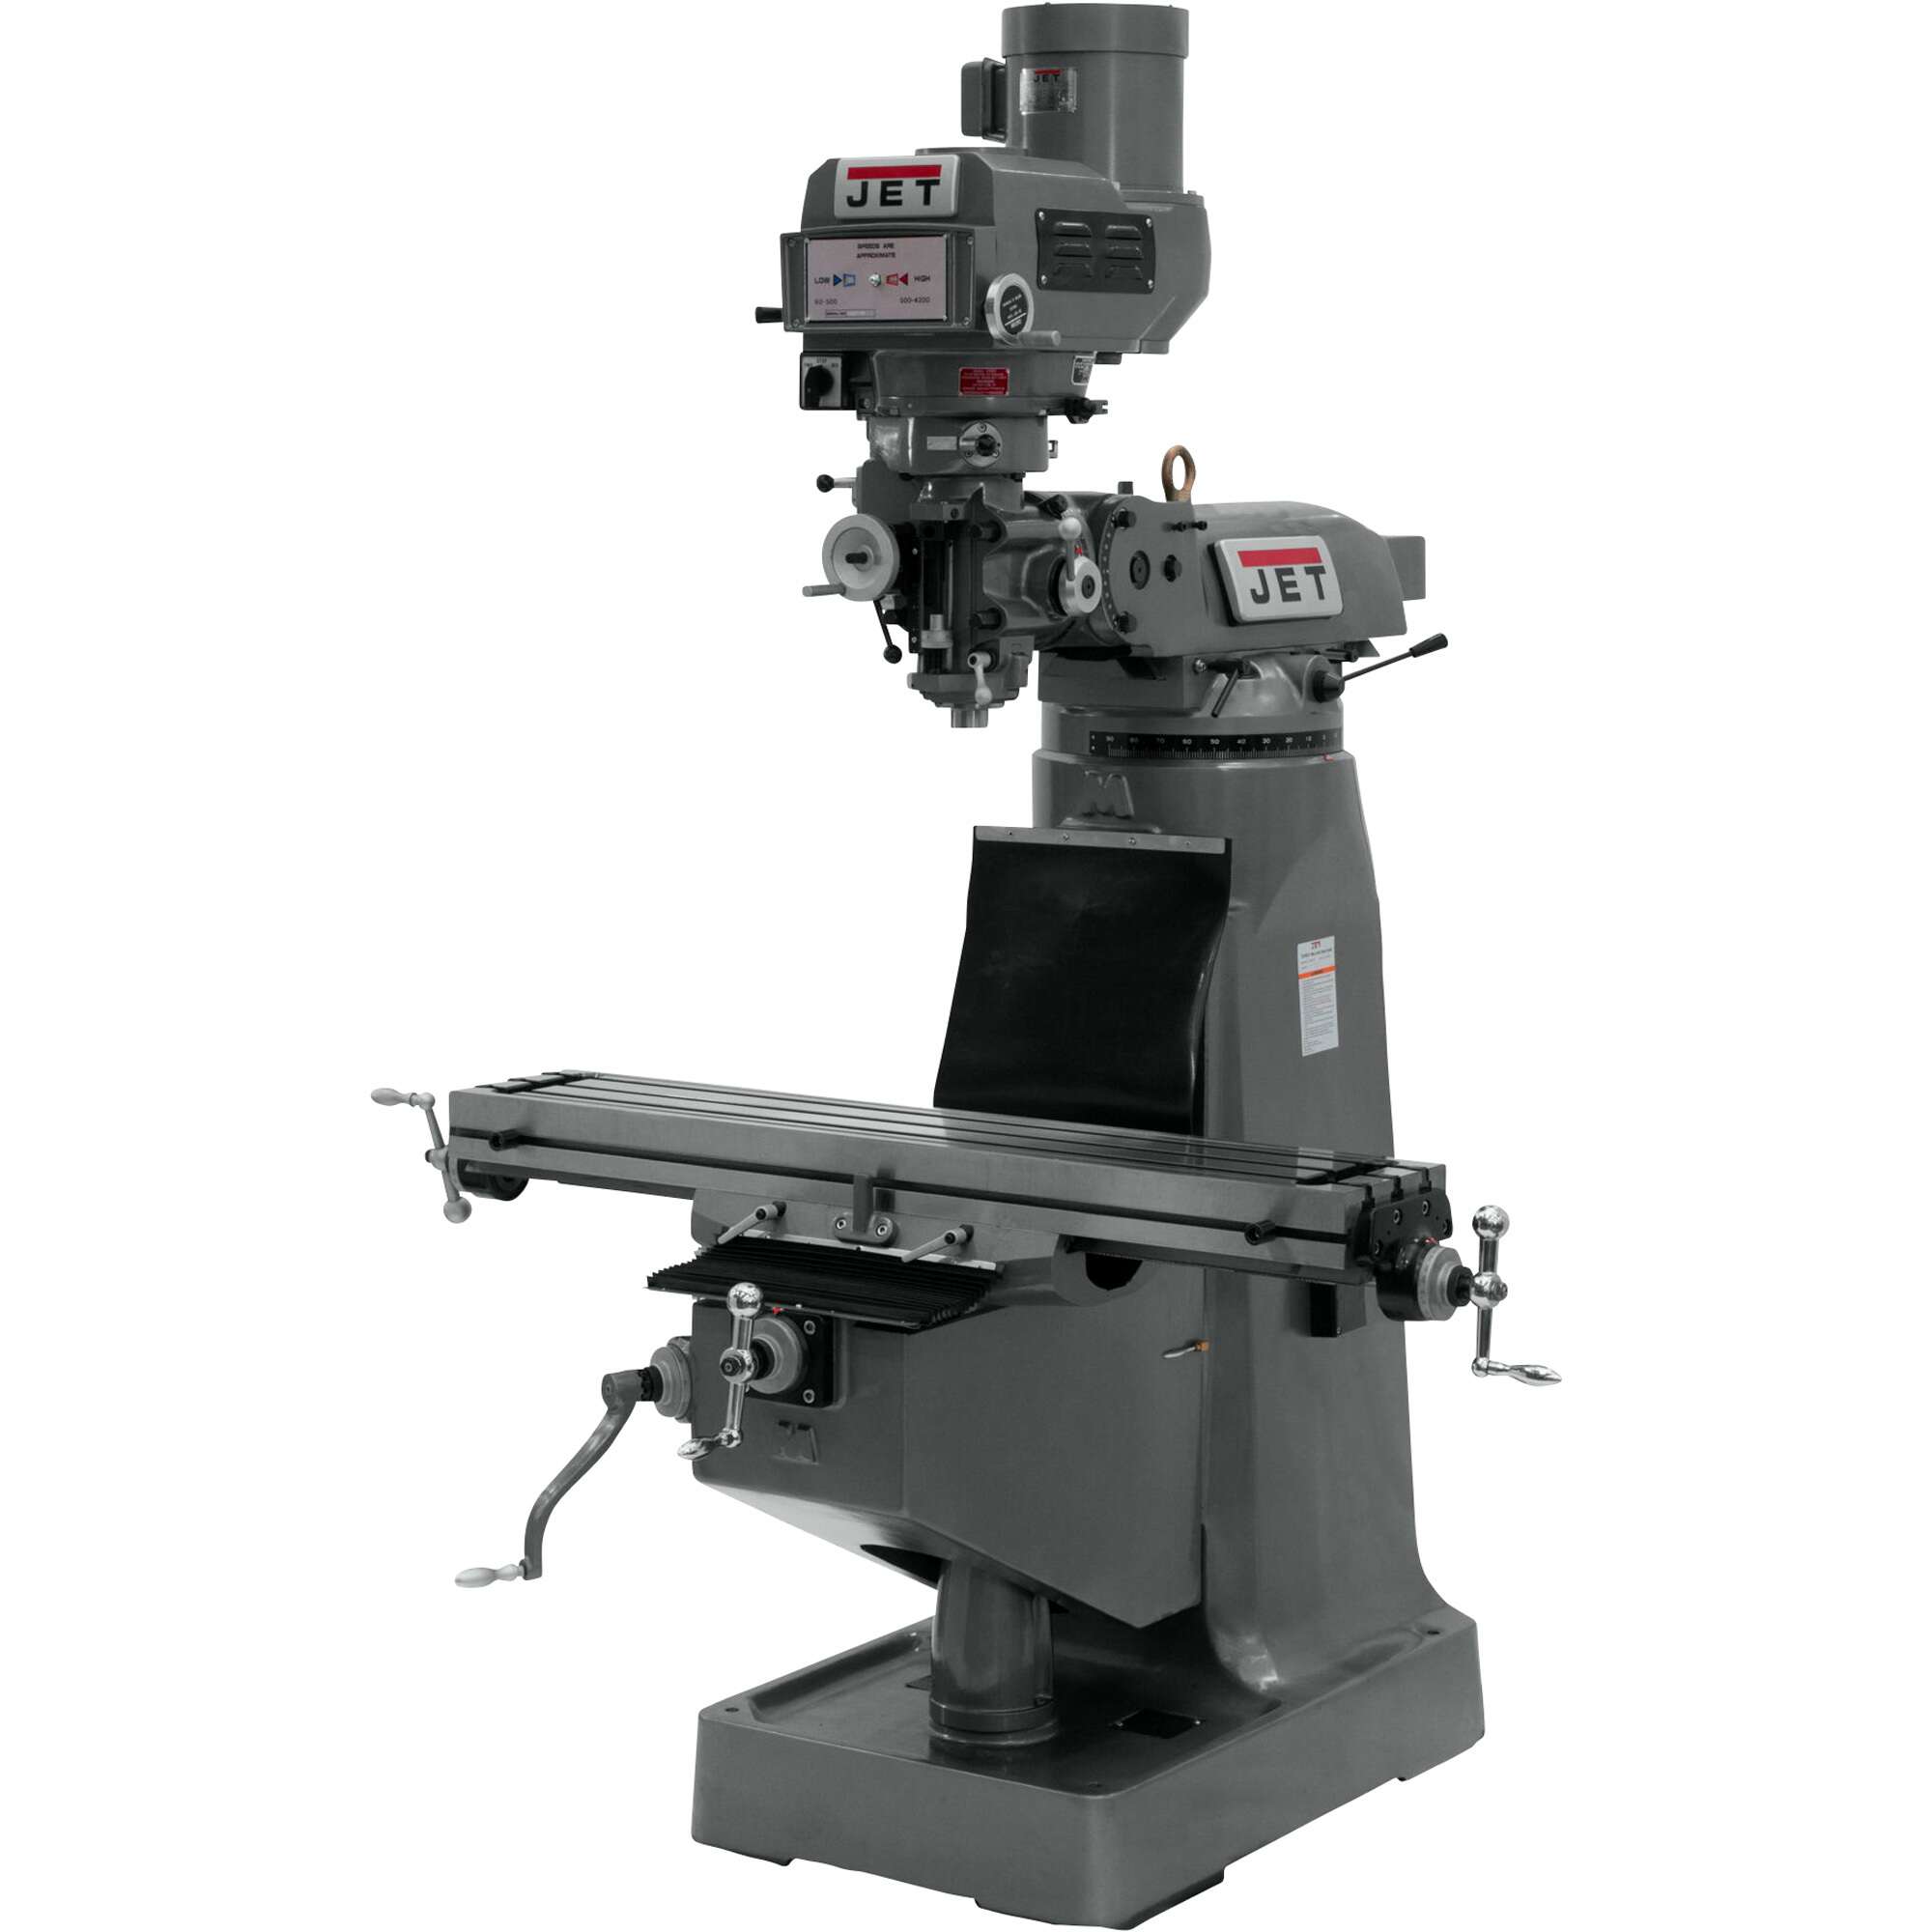 JET Variable Speed Turret Milling Machine 9in x 49in 230 460 Volt 3 Phase